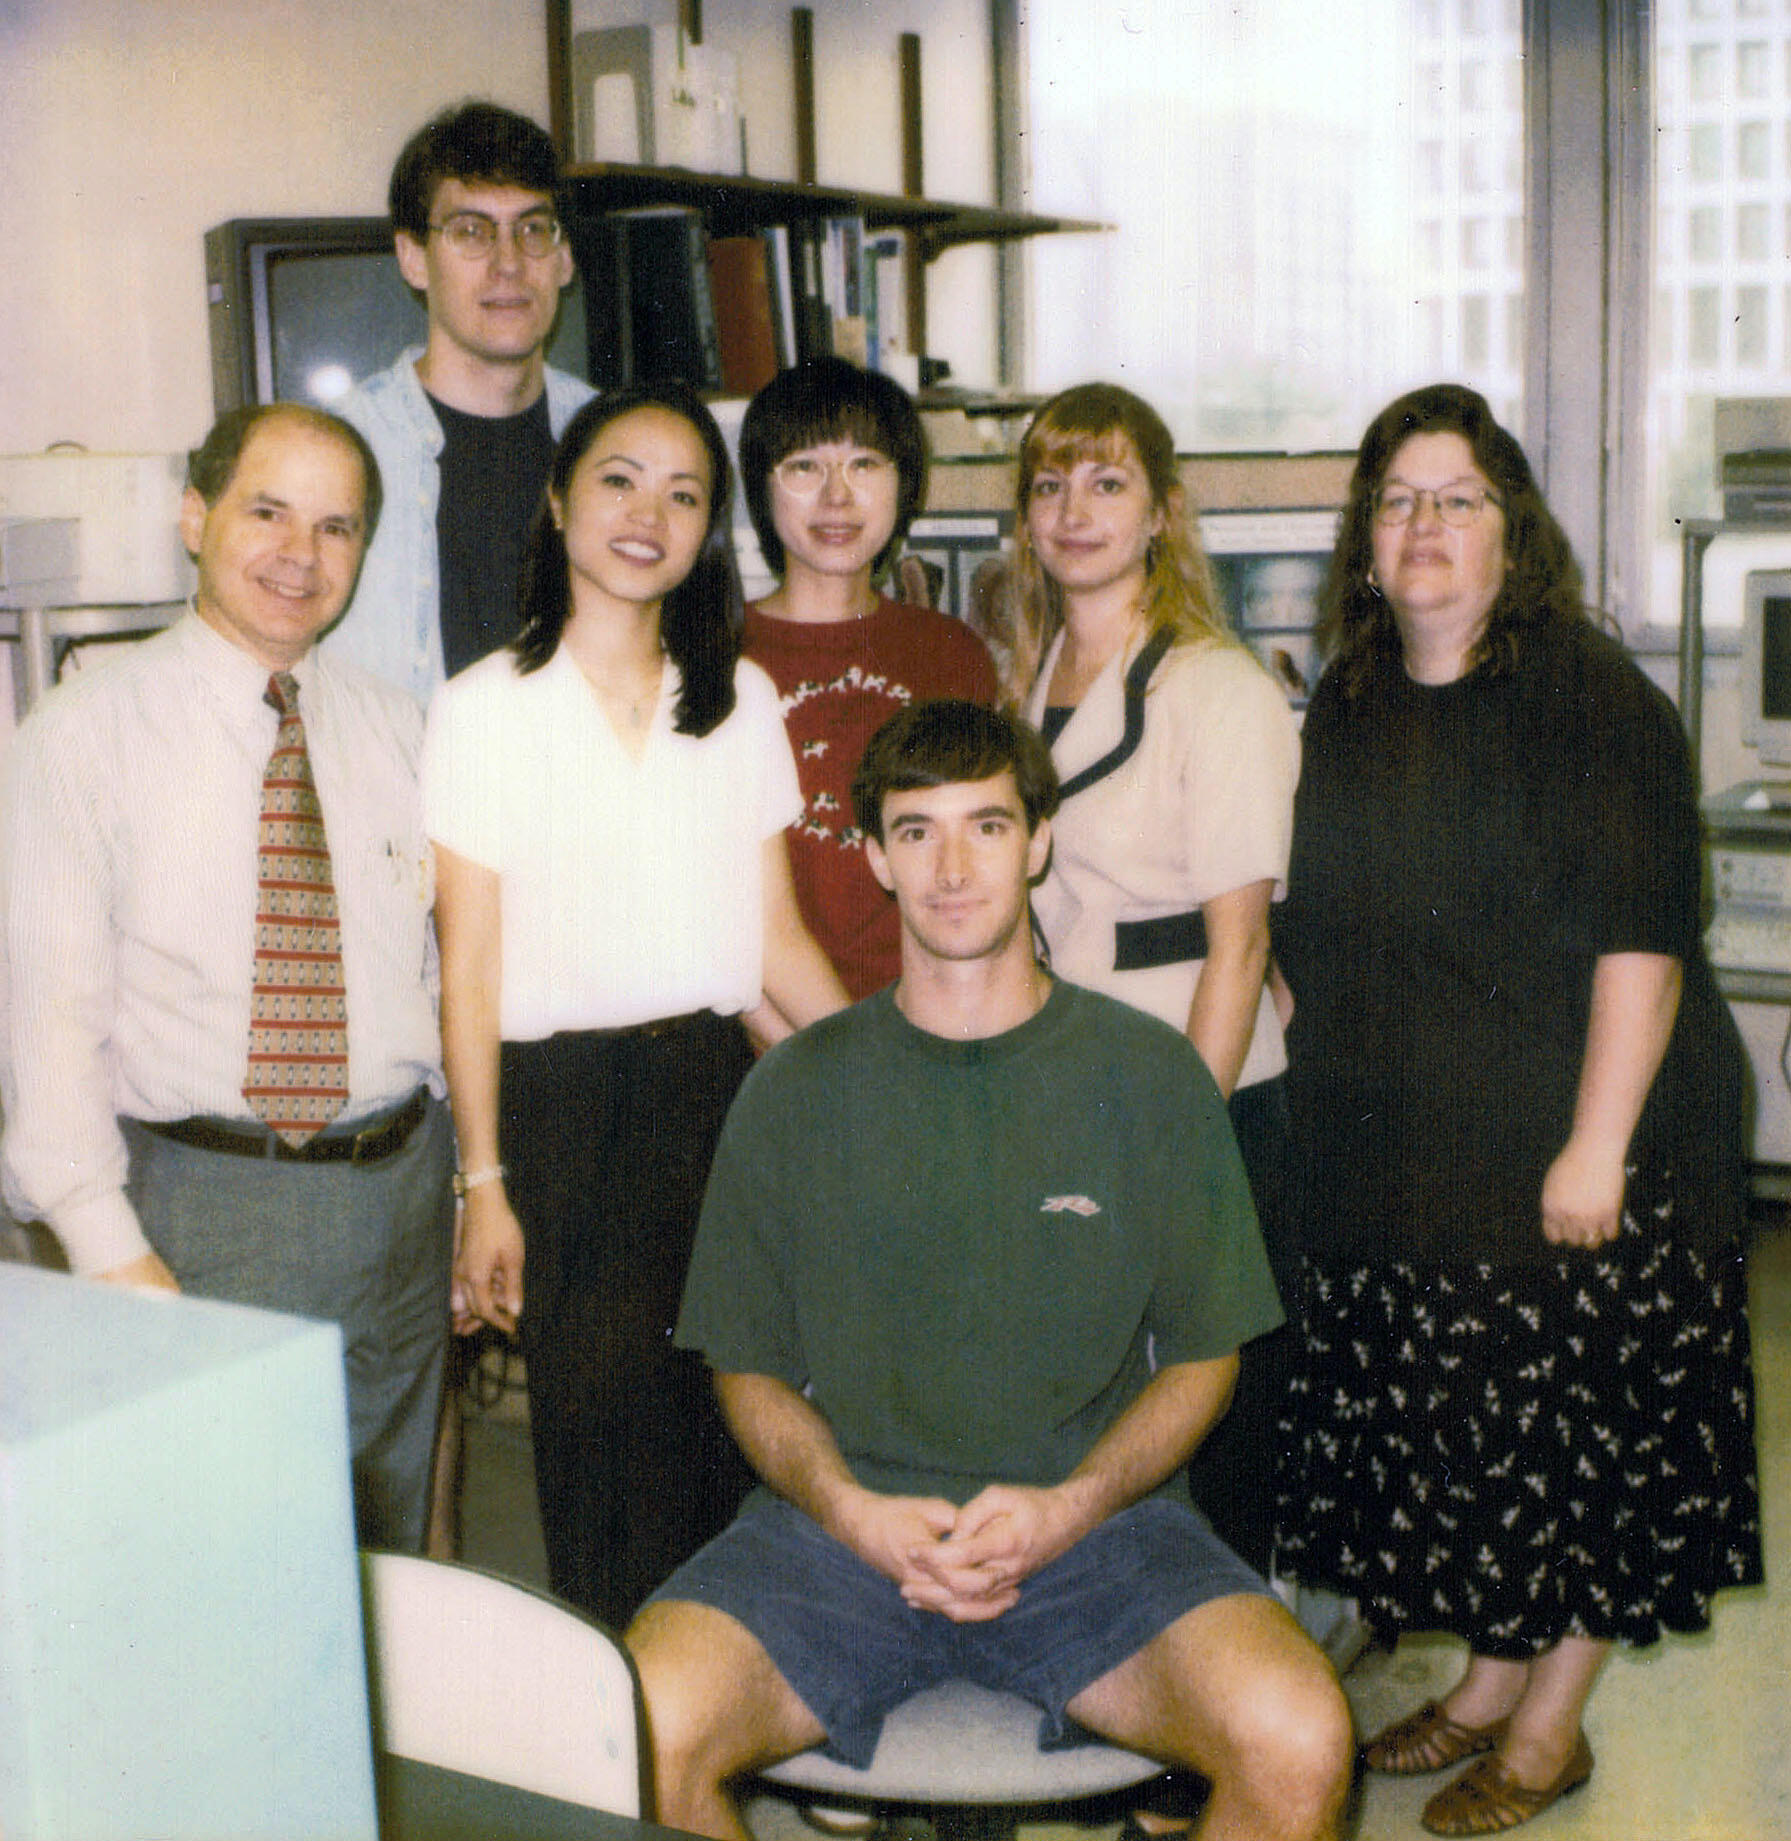 In this 1998 photo from the lab of Richard Costanzo, Mark Richardson is seated in the front row with Eric Holbrook standing in the back. The two reunited as faculty members at Harvard Medical School.